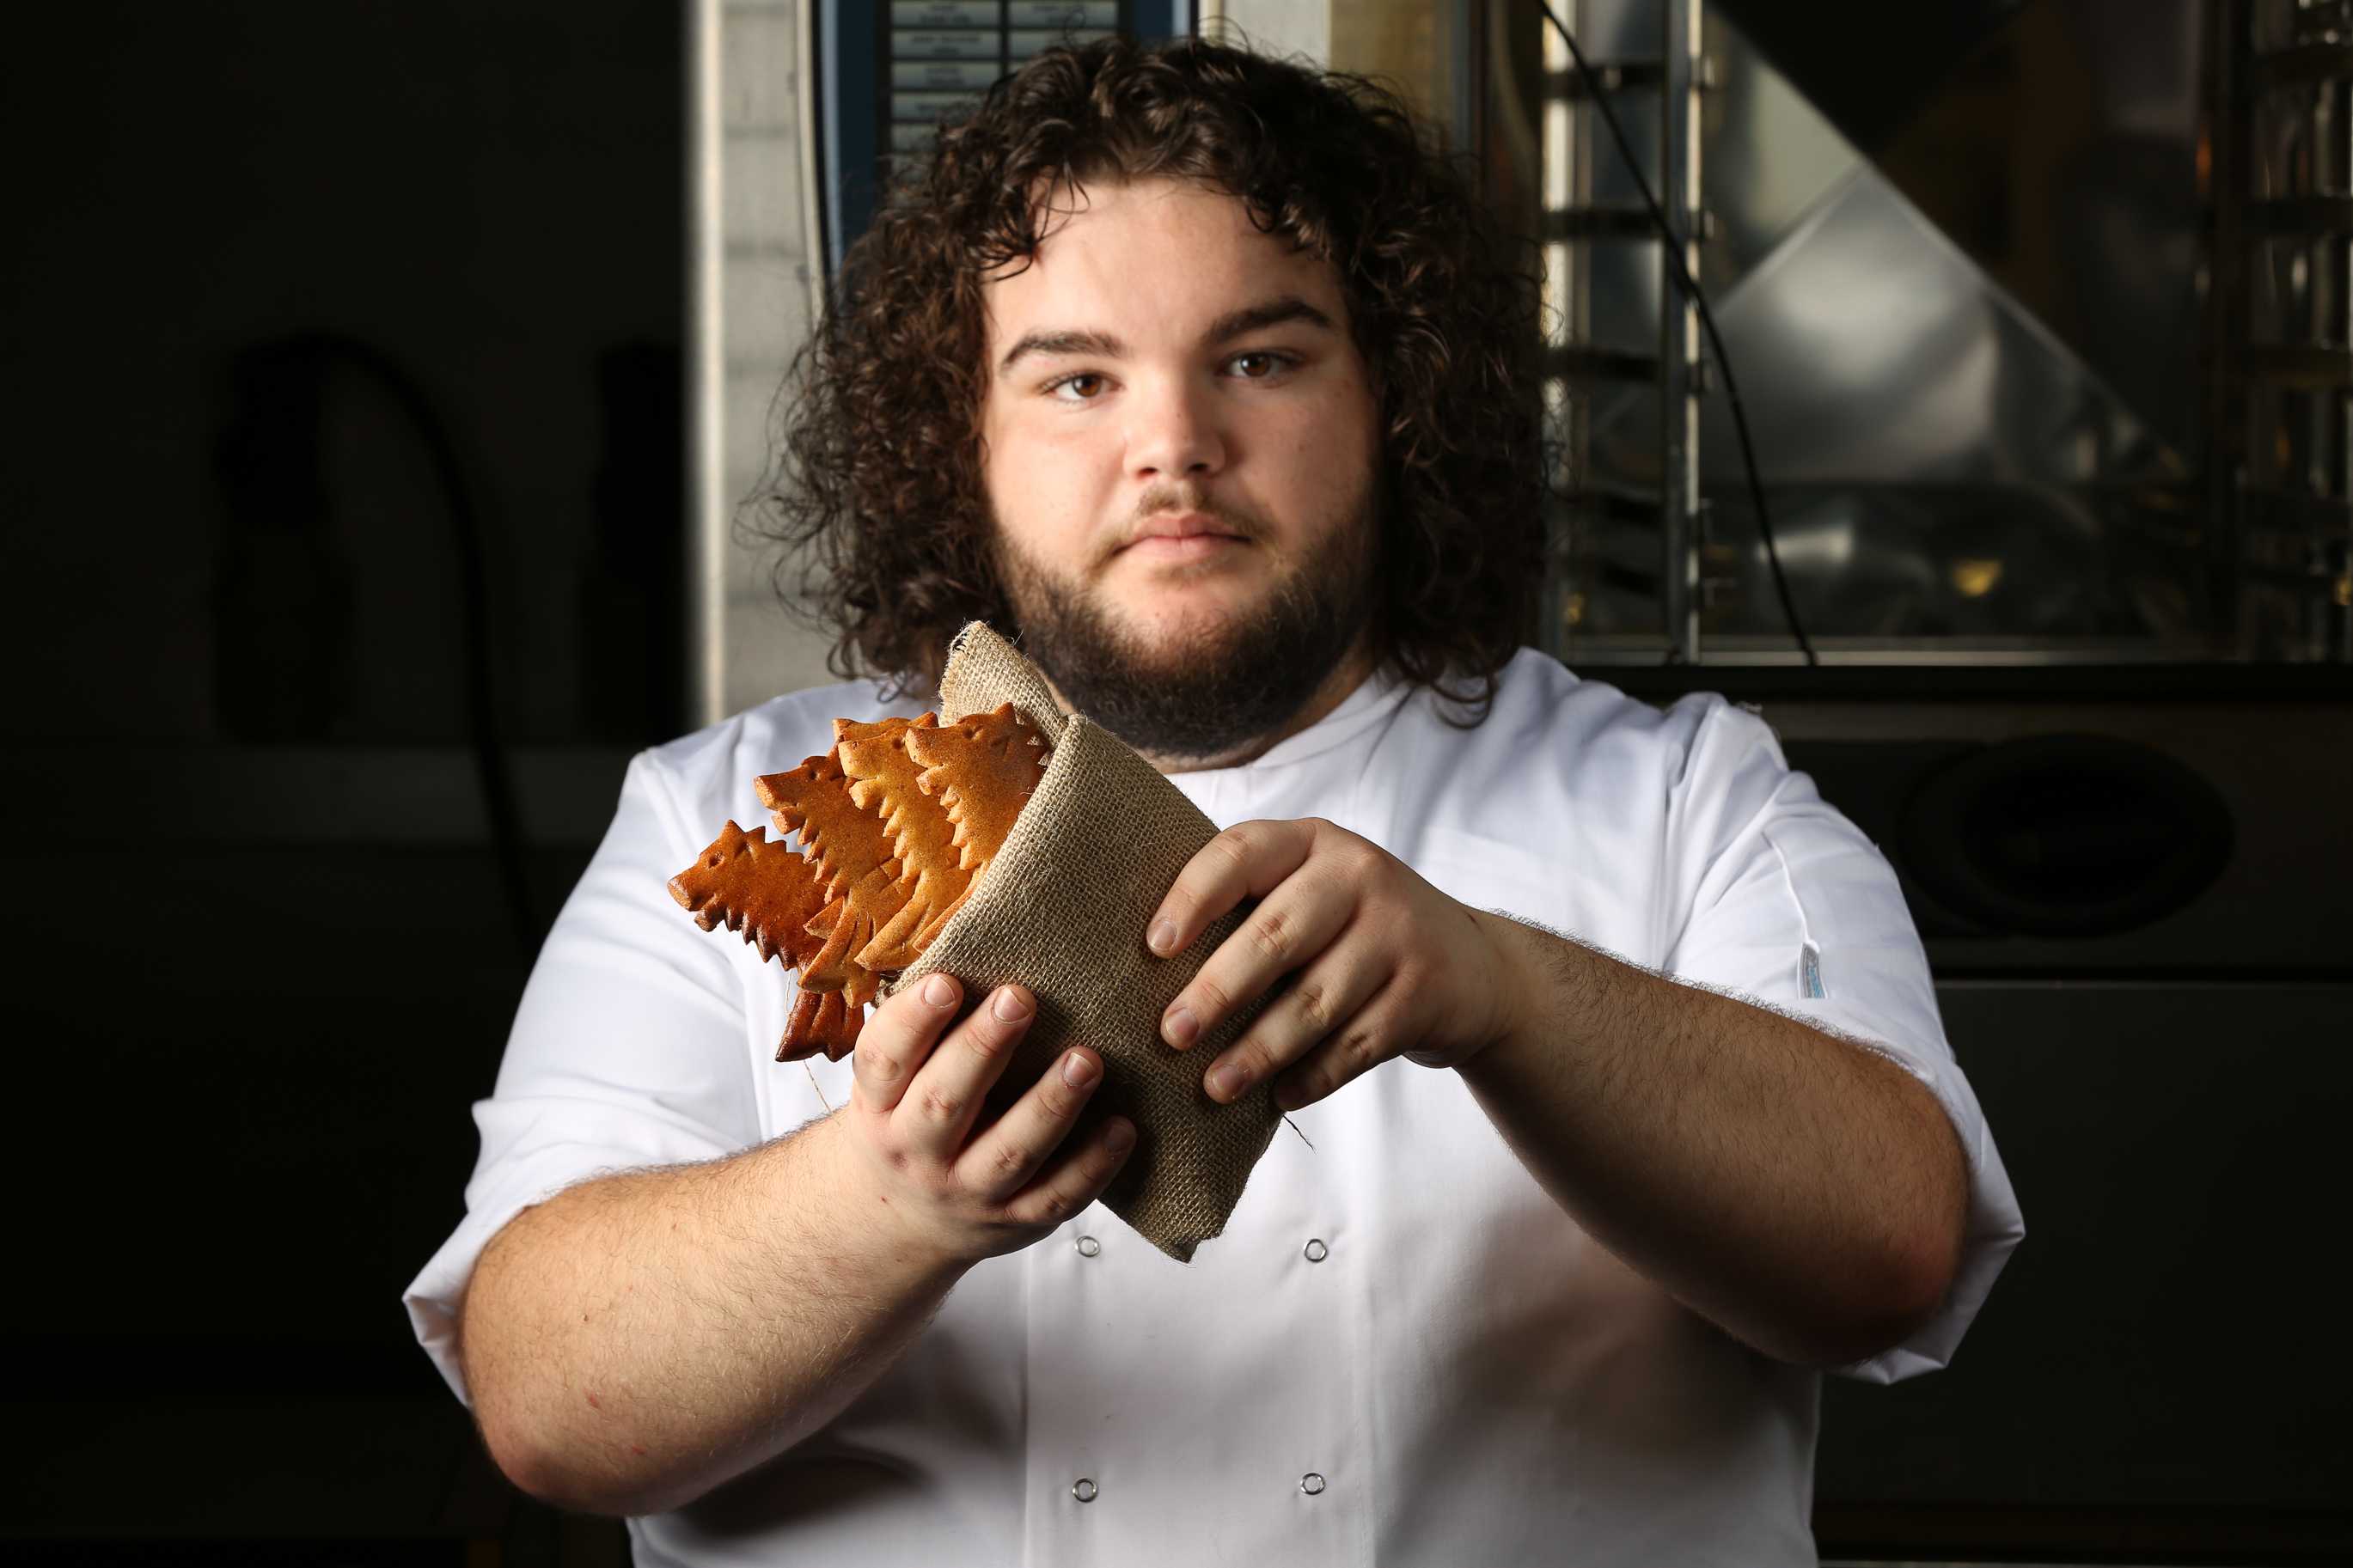 'Game of Thrones' actor's new bakery has the perfect name